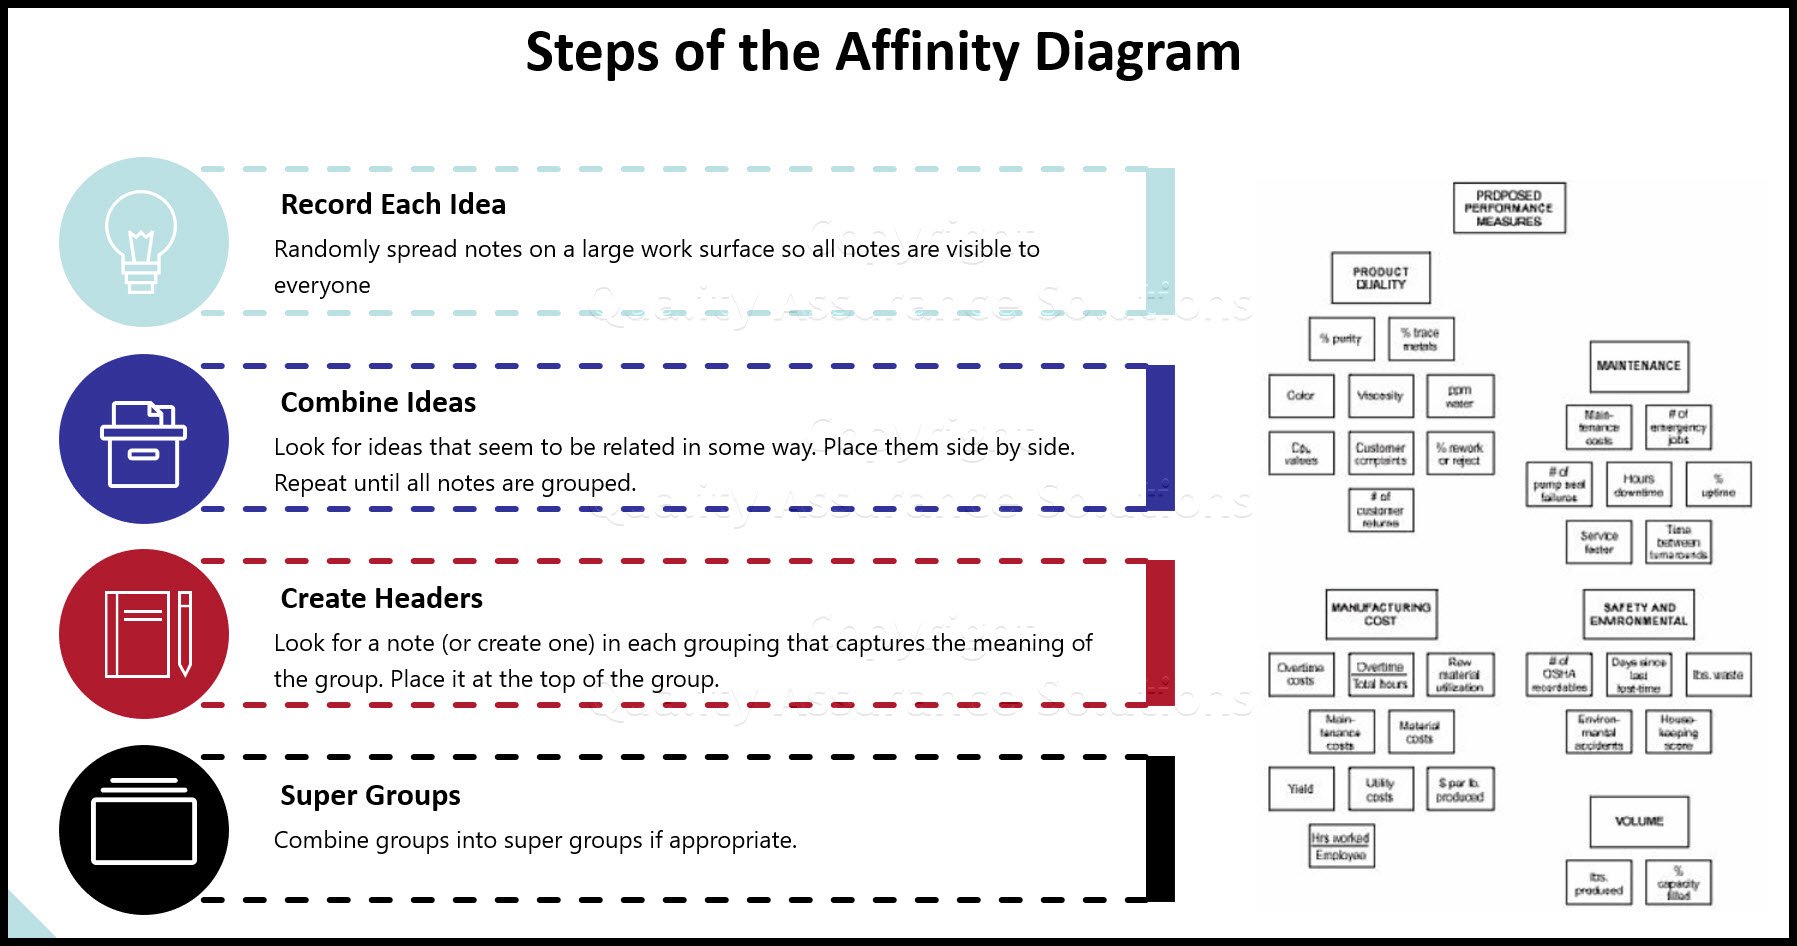 Learn when and how to use the Affinity Diagram